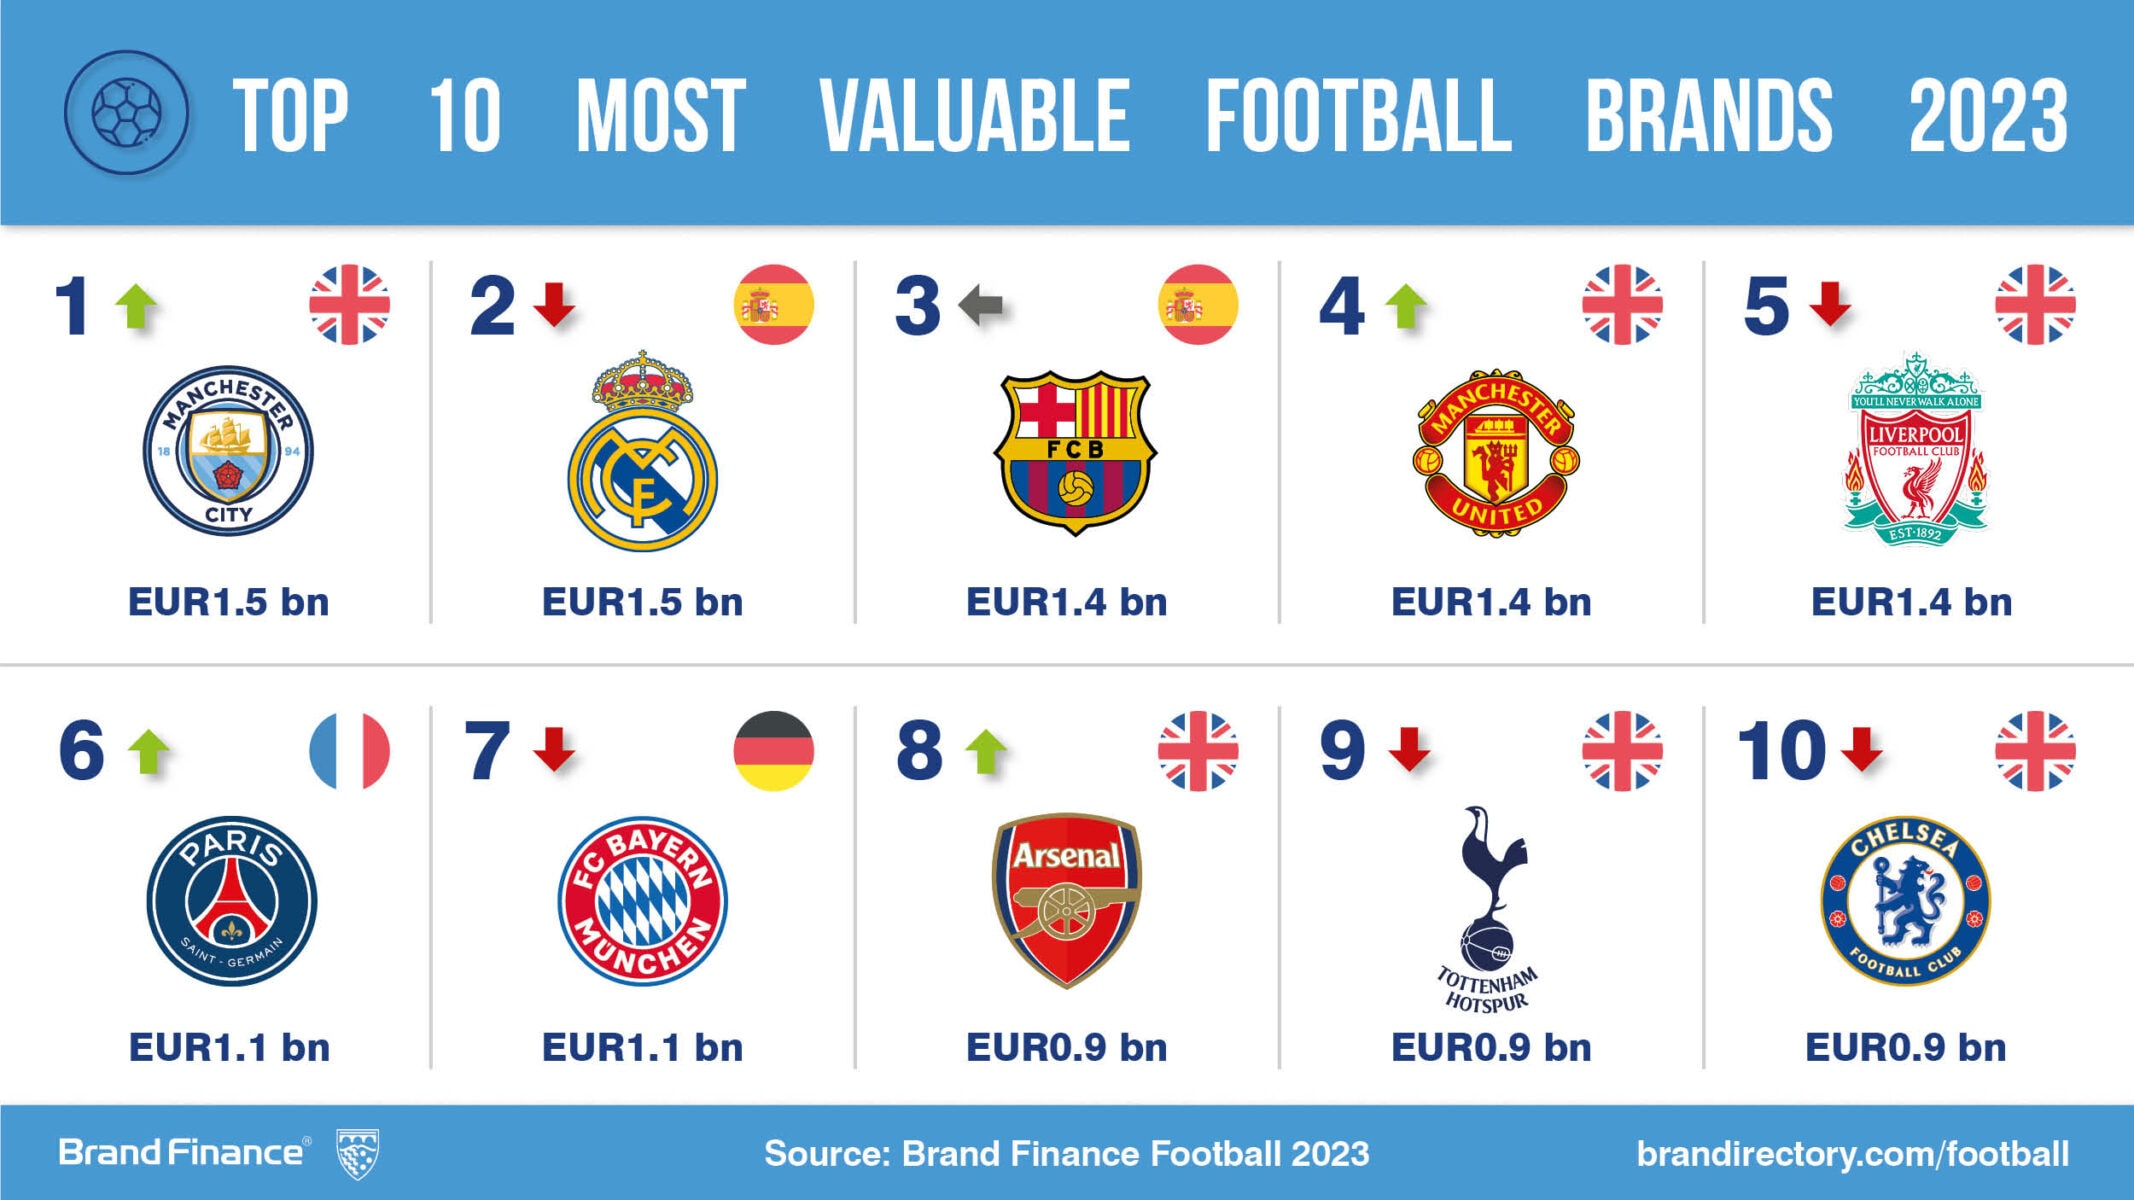 World's 50 Most Valuable Soccer Teams: Man United, Real Madrid Lead –